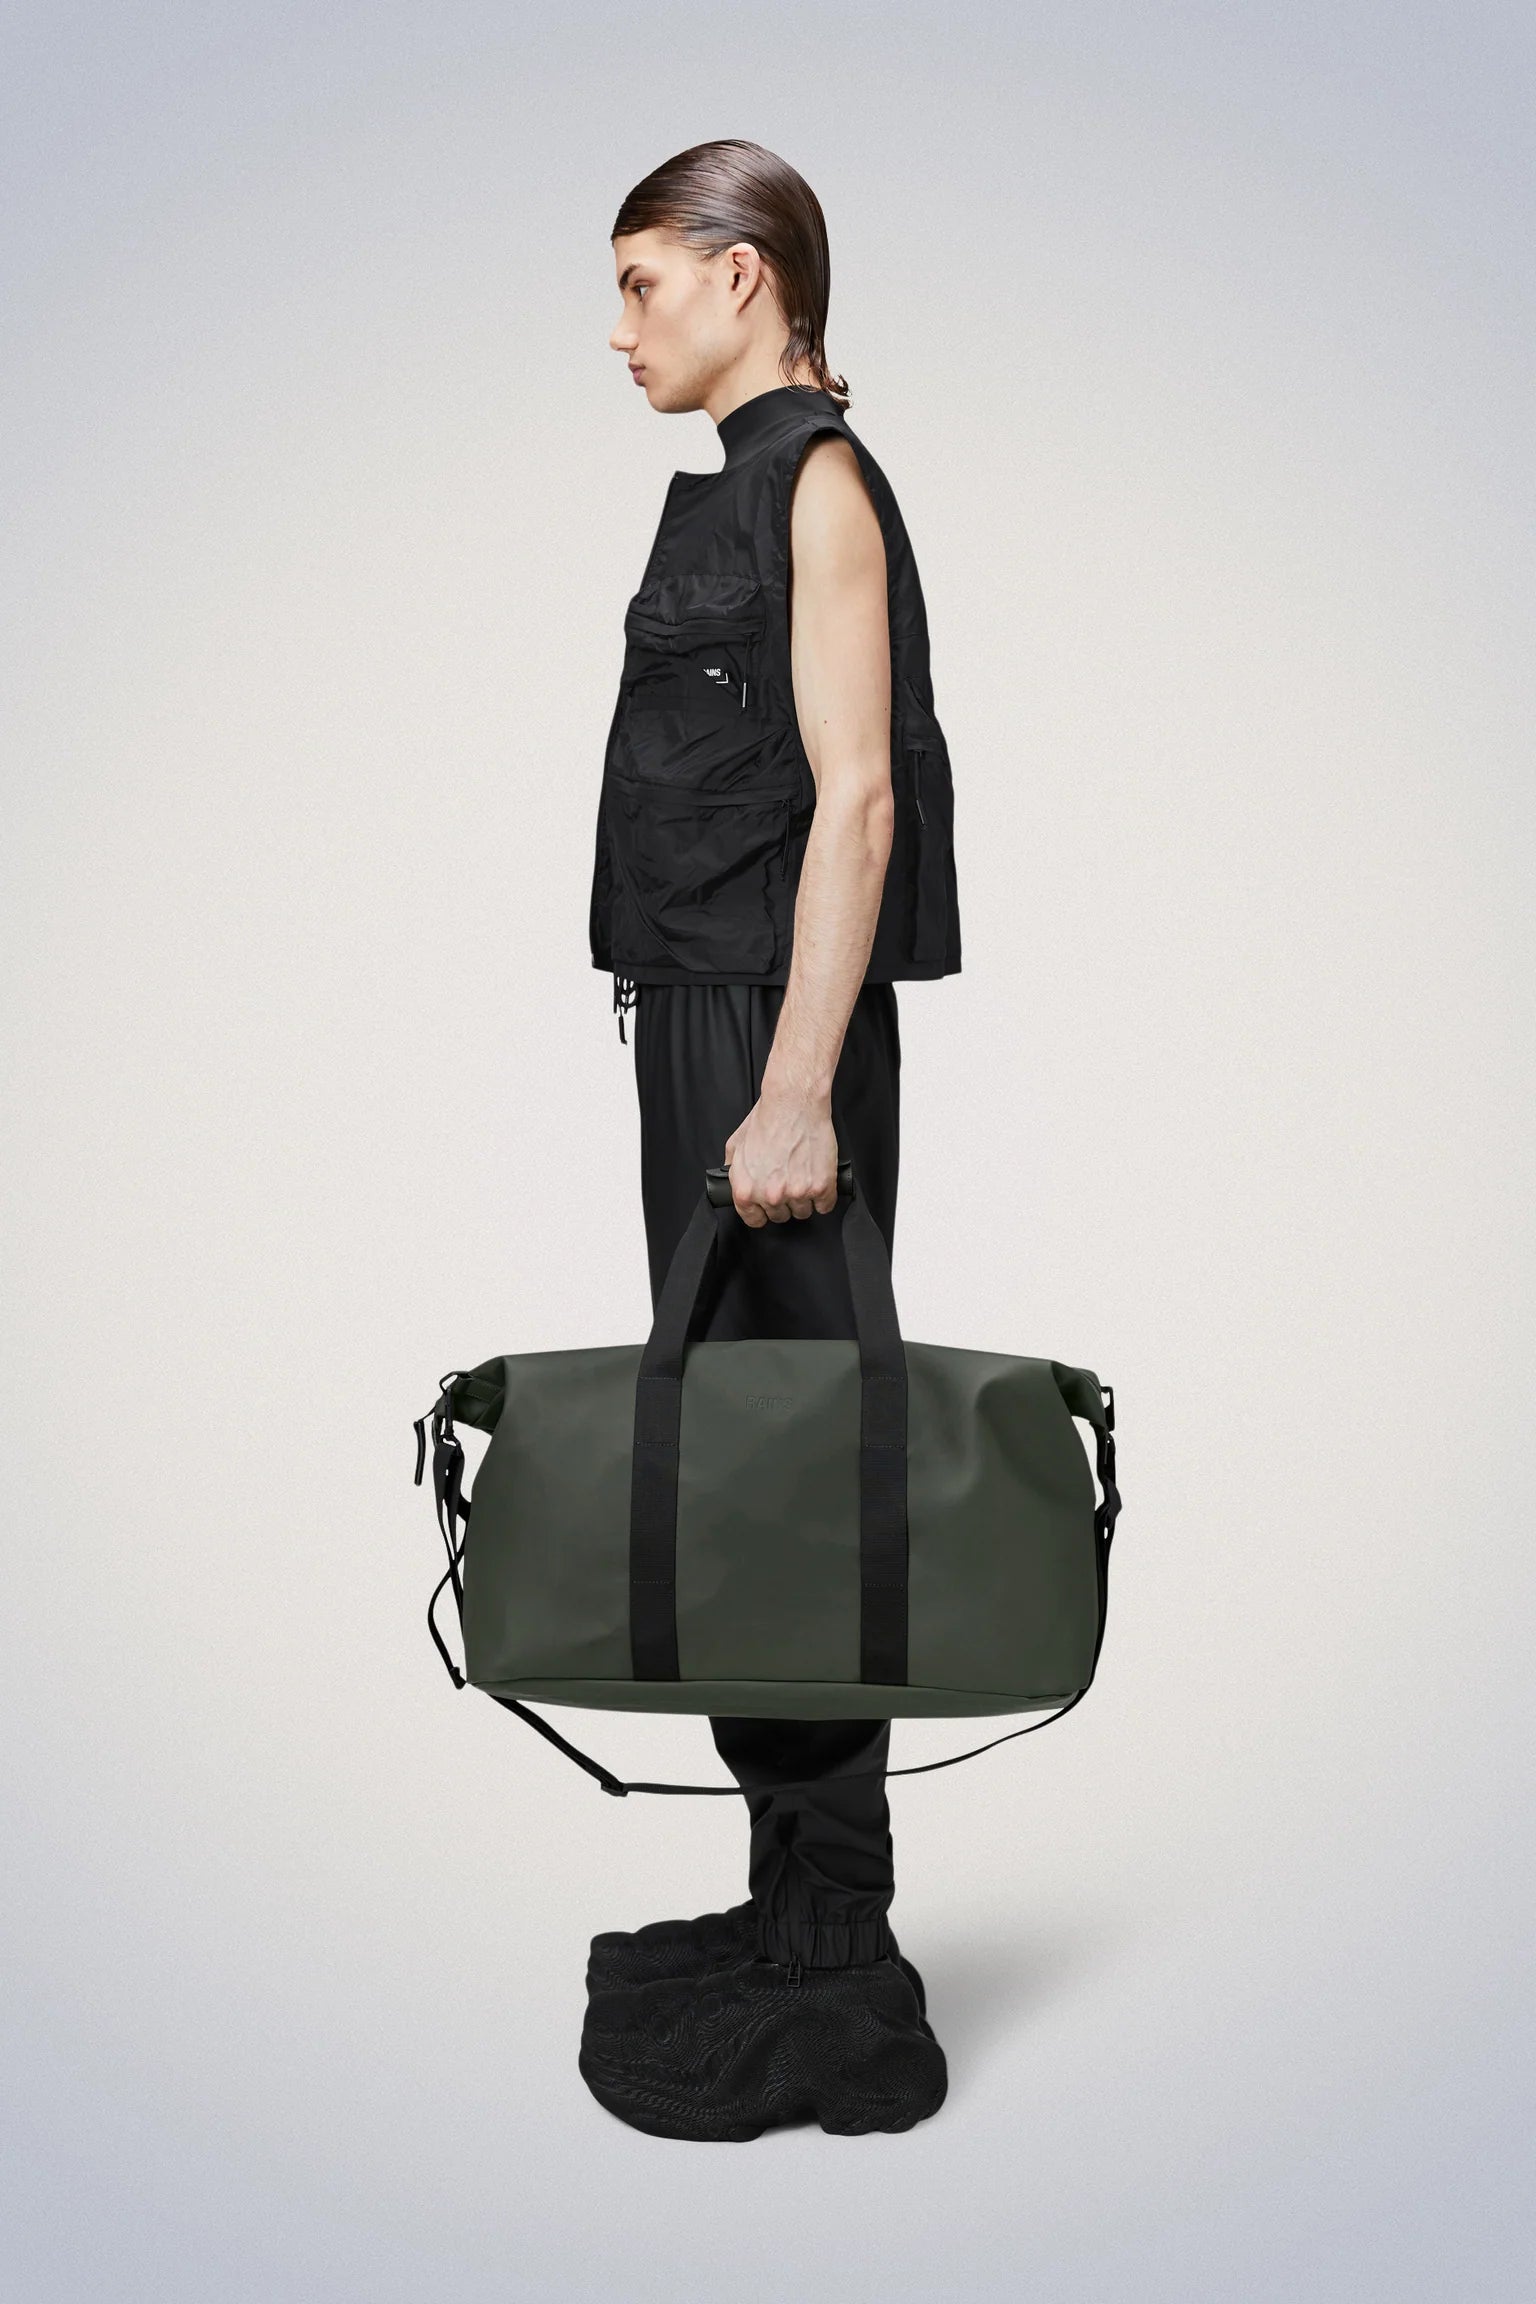 A man is holding his travel-favourite, the Rains Hilo Weekend Bag, a green duffel bag perfect for overnight getaways.